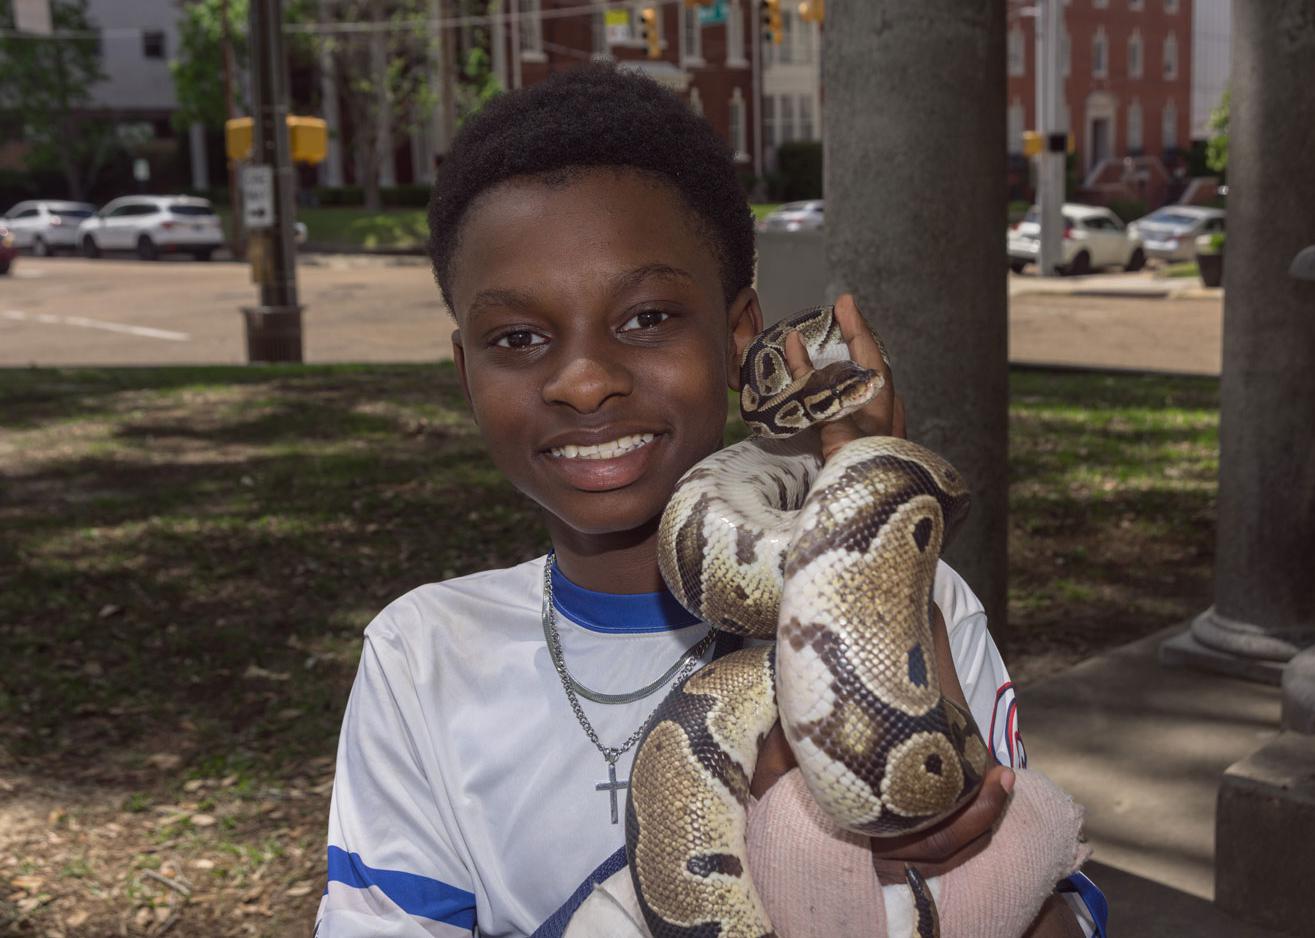 A young smiling Black man holding a snake and standing near a city street.